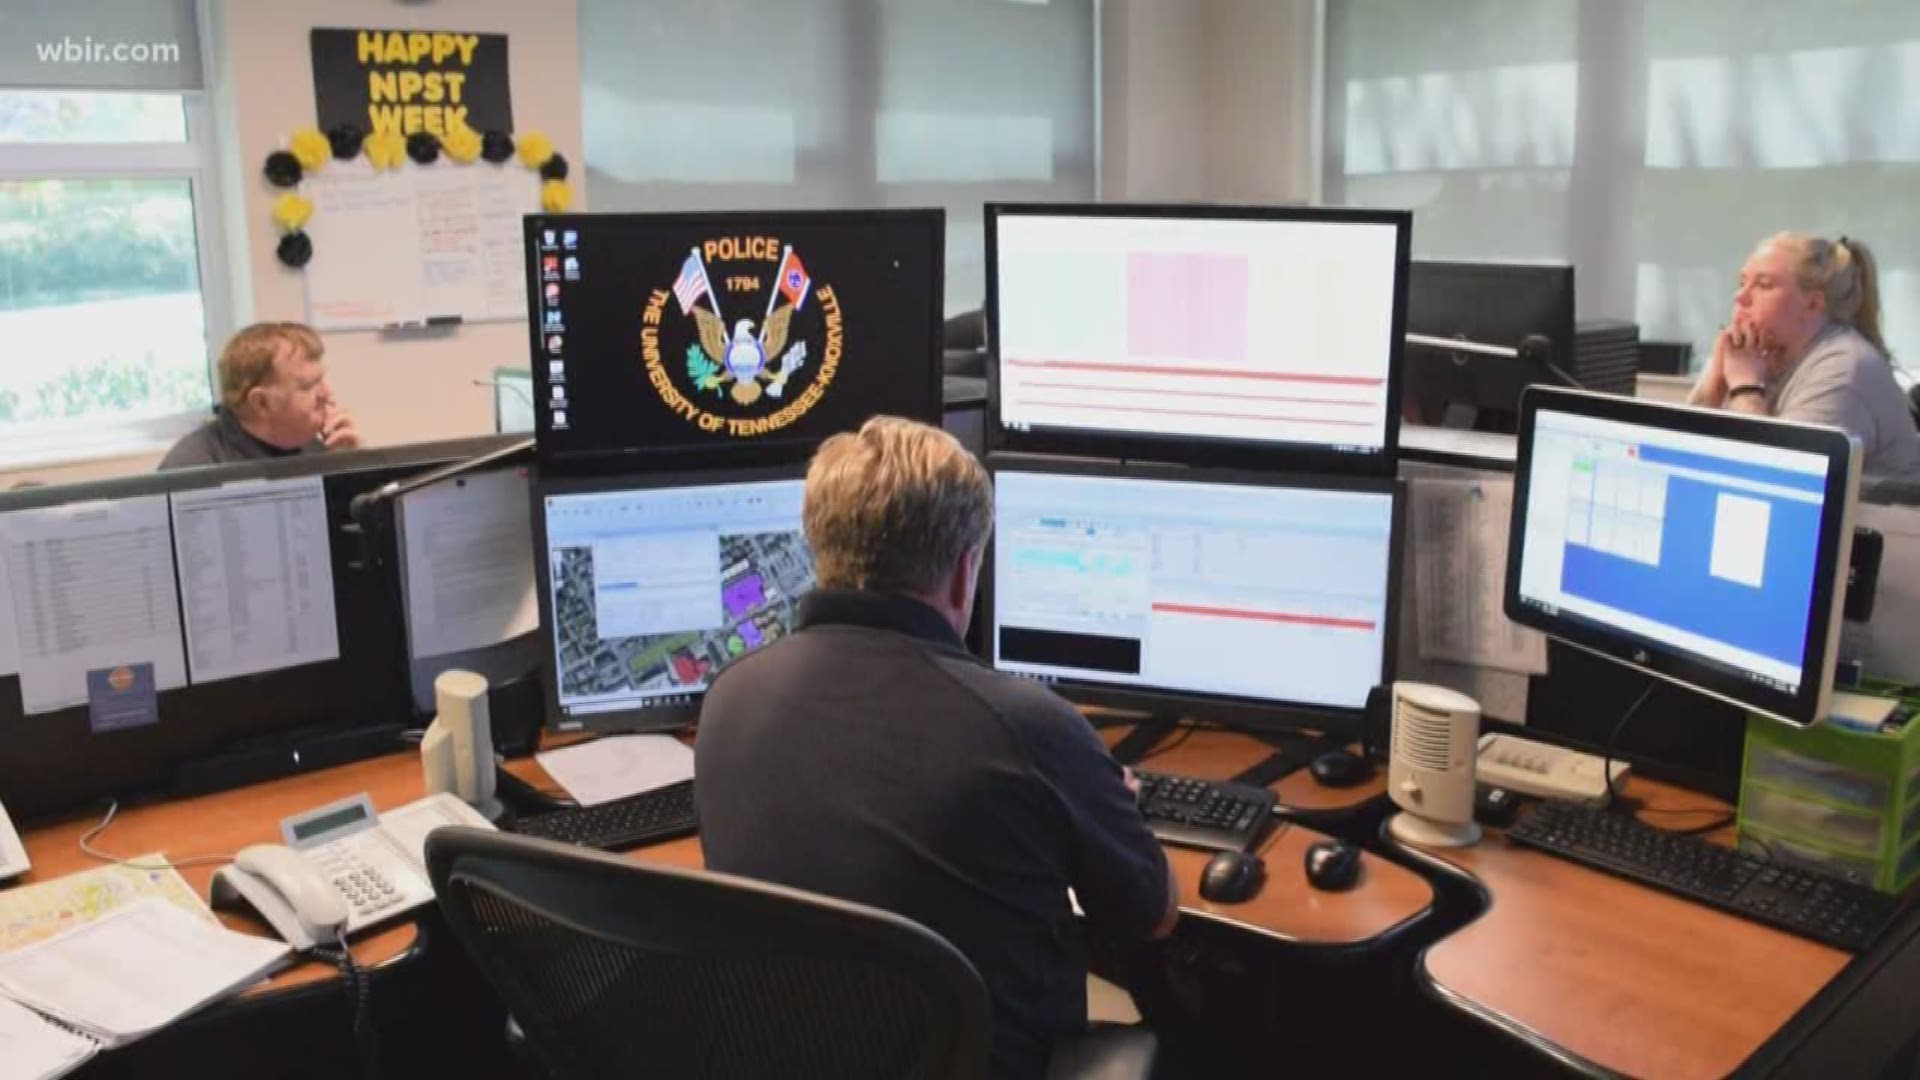 It's a career that's far from the spotlight, but essential to keeping people safe. It's National Public Safety Telecommunicators Week and University of Tennessee dispatchers are highlighting some of their most memorable calls.